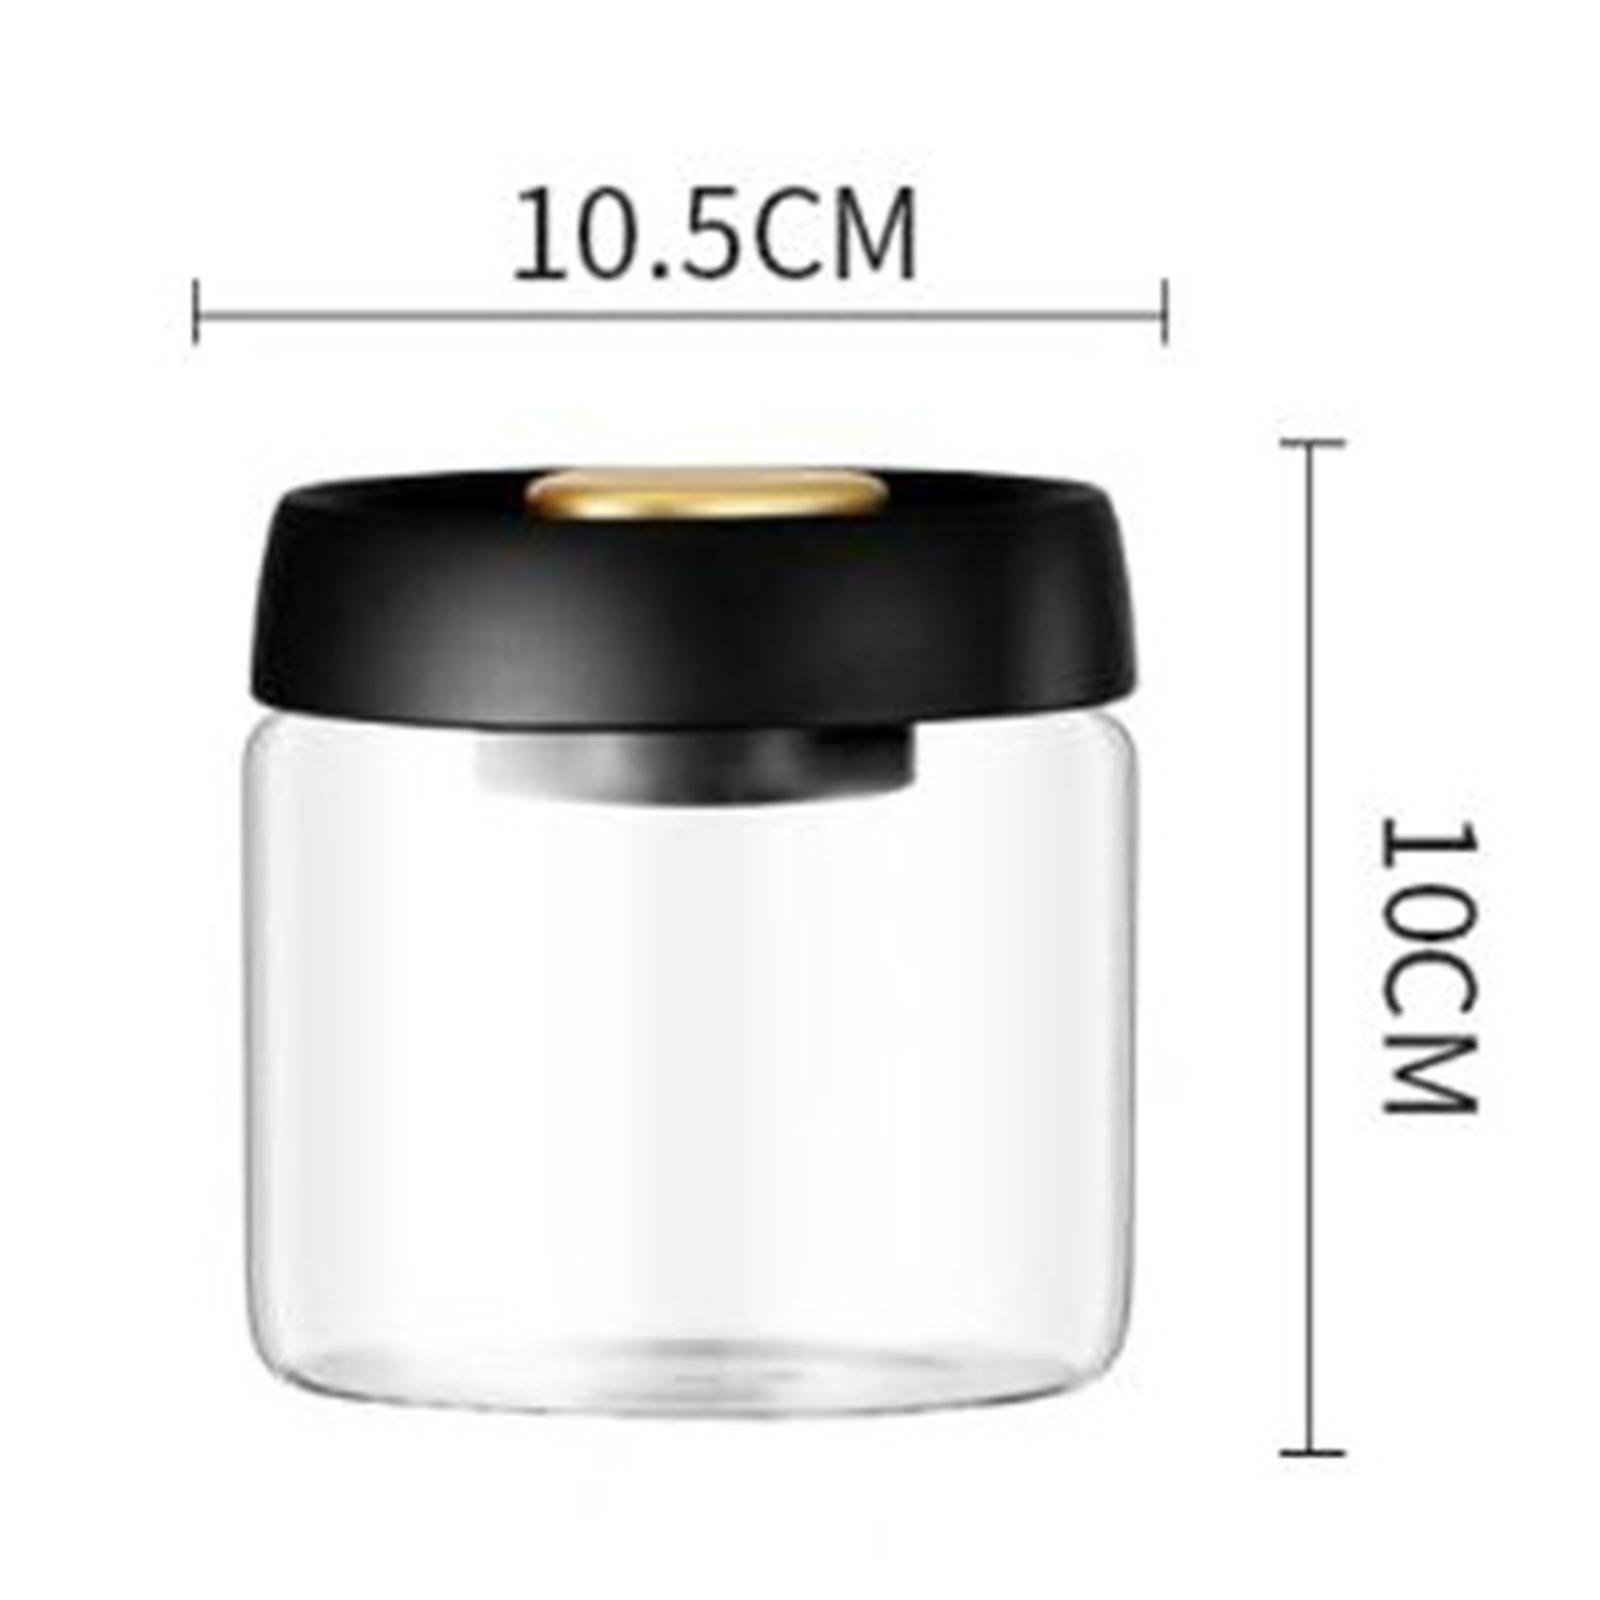 Vacuum Food Storage Canister Sugar Candy Cereal Storage Cans for Beans